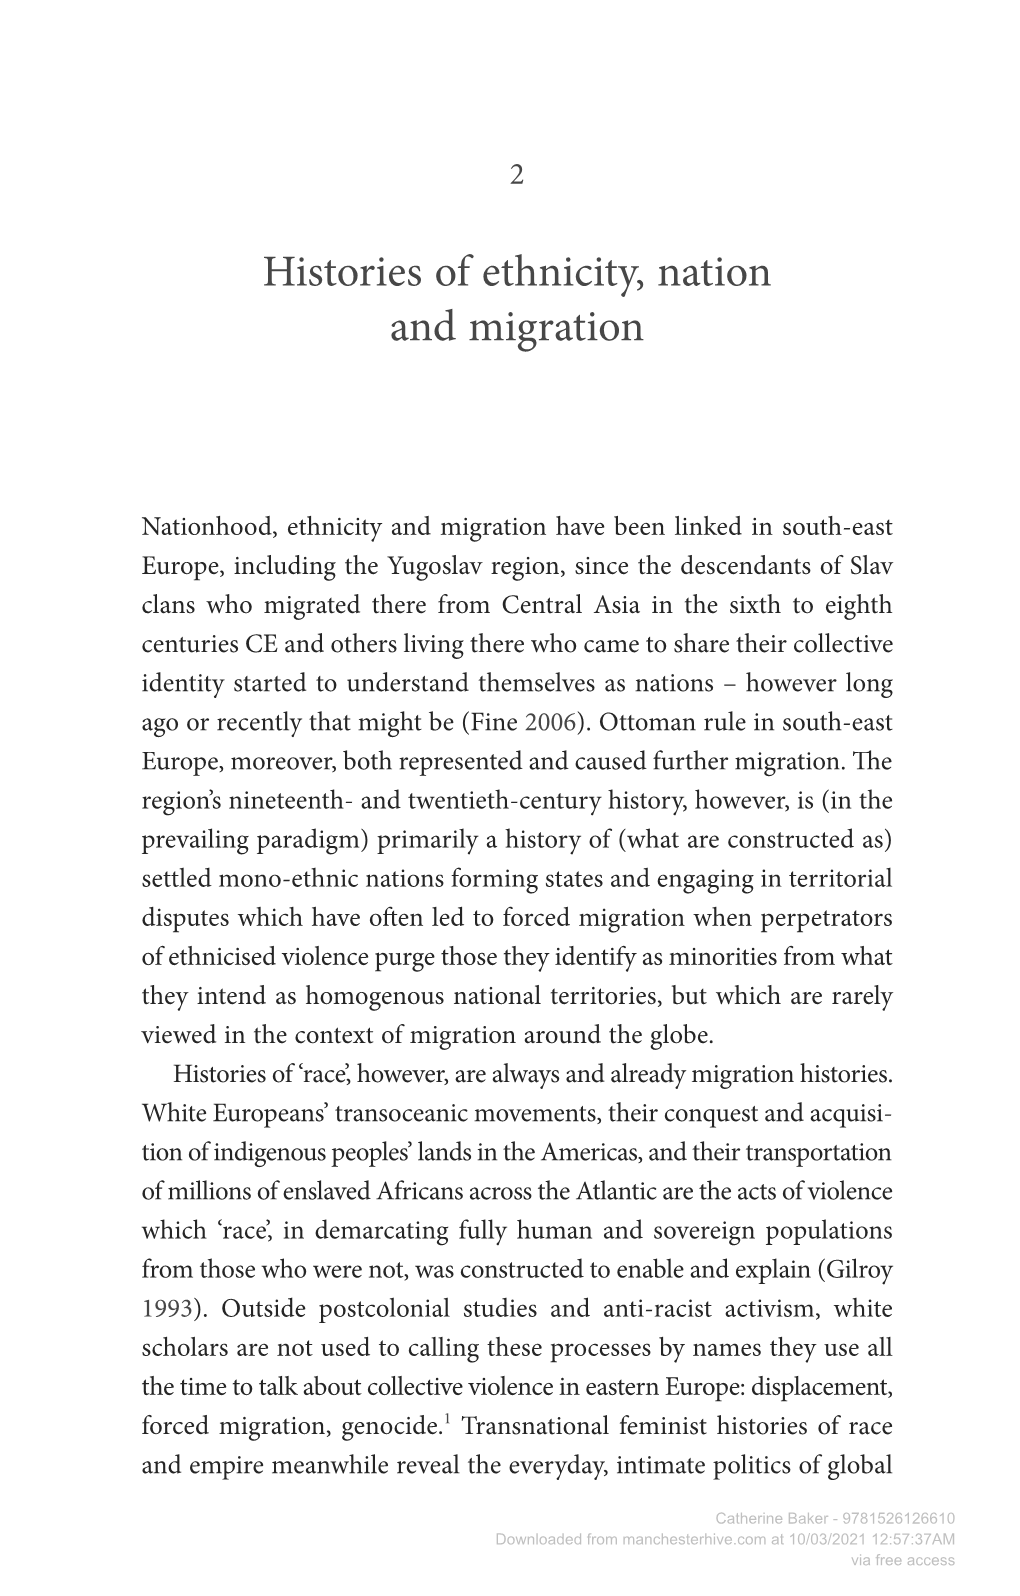 Histories of Ethnicity, Nation and Migration